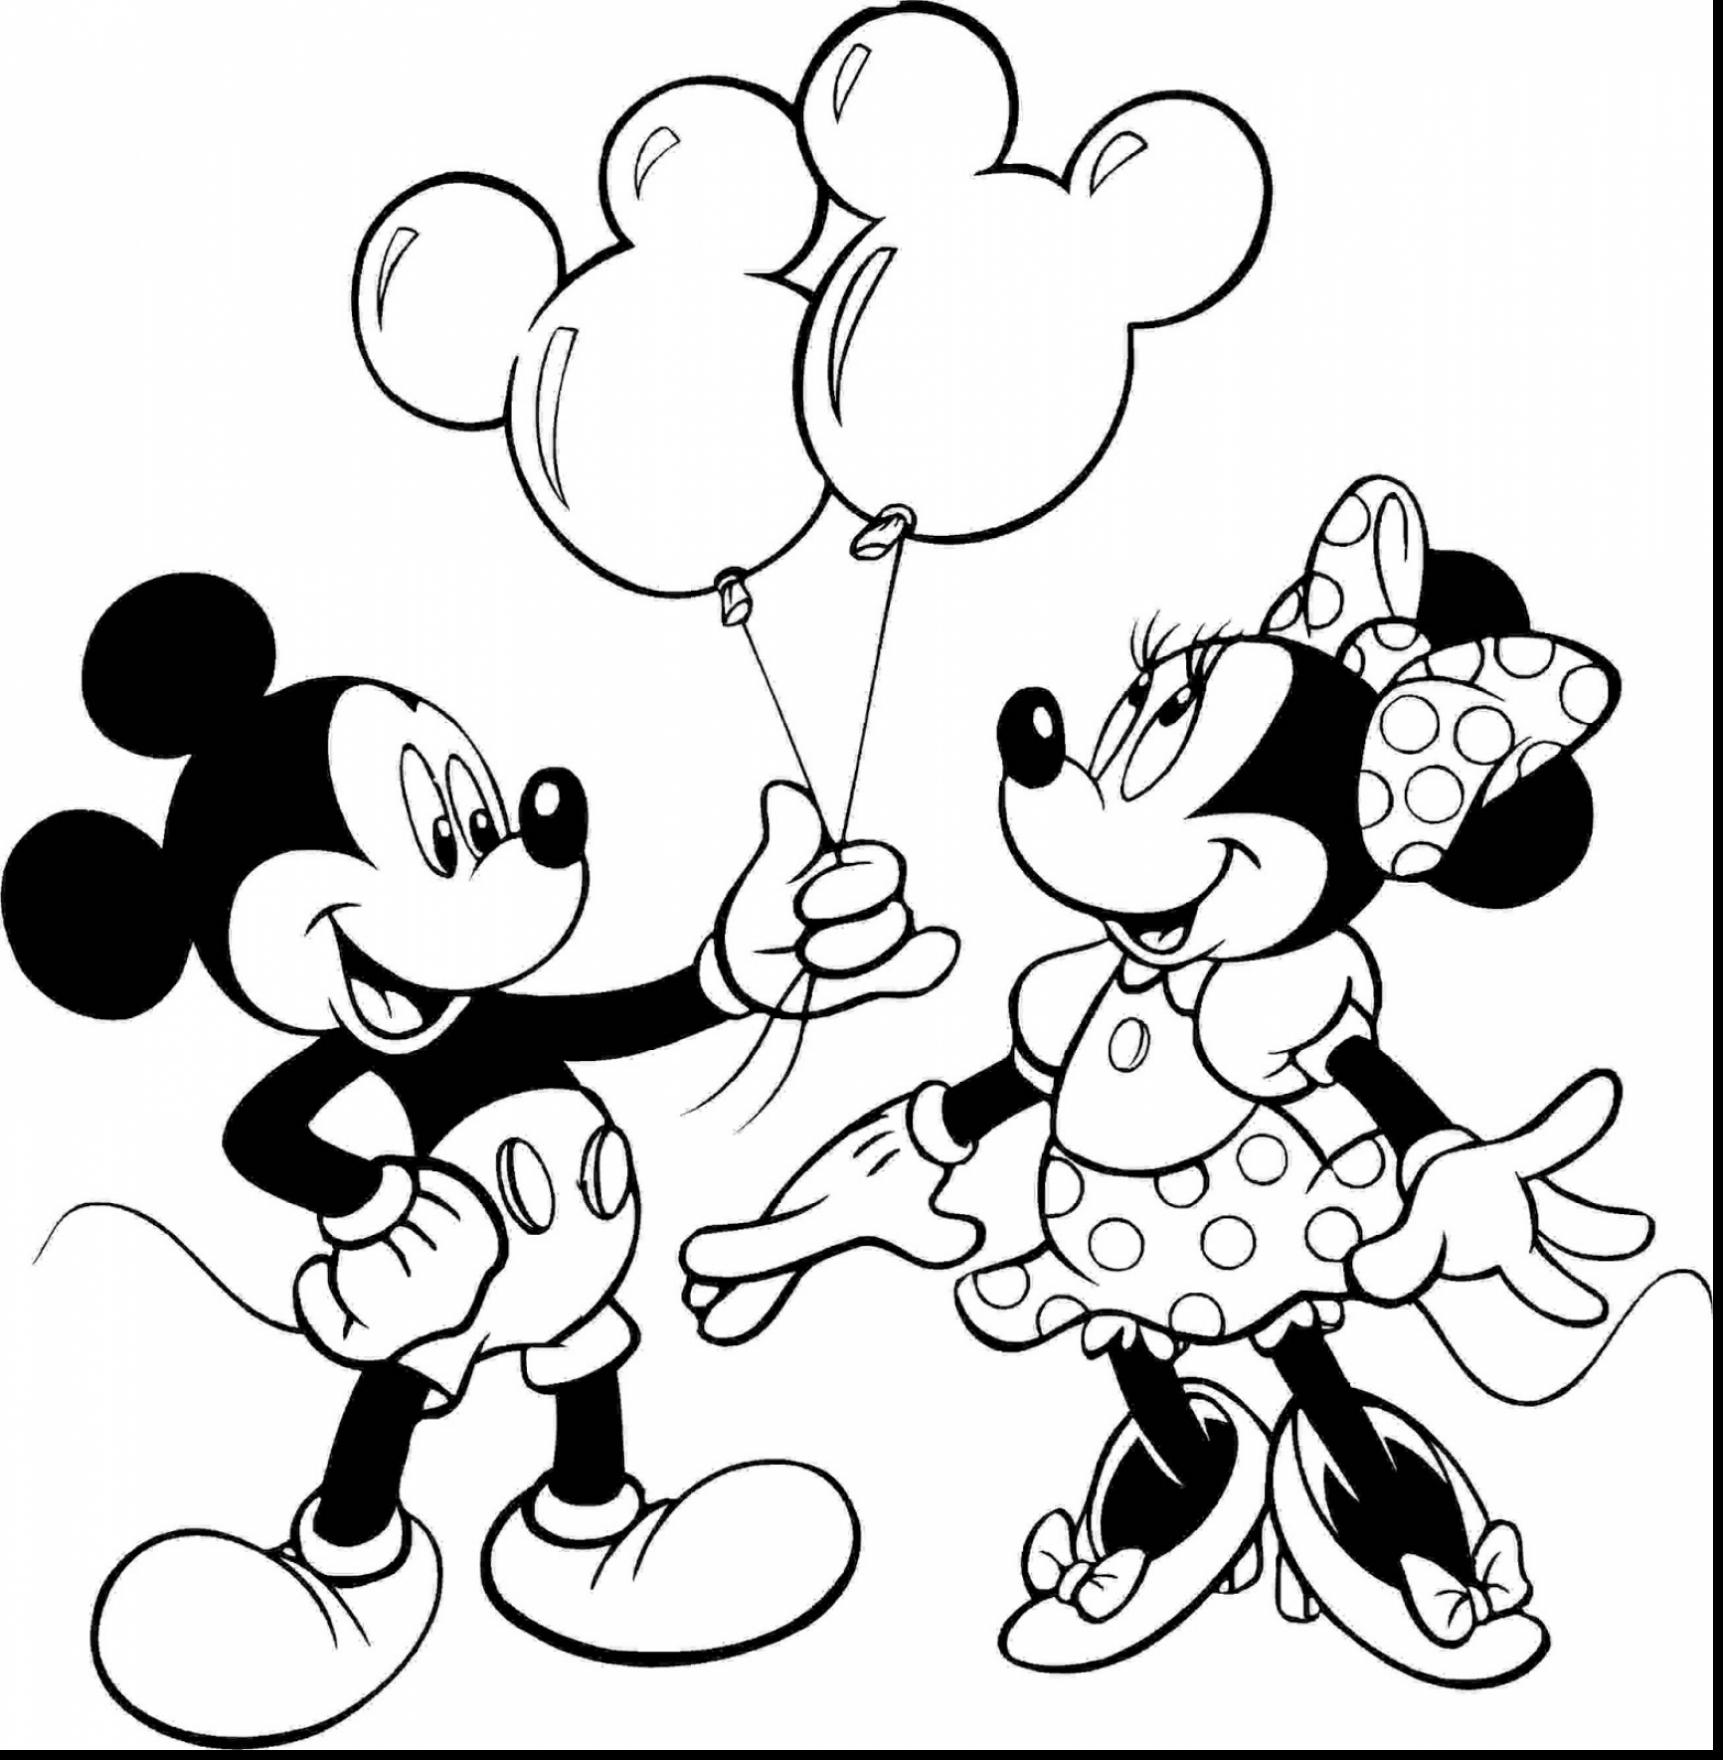 Coloring pages minnie mouse coloring pages coloring pages